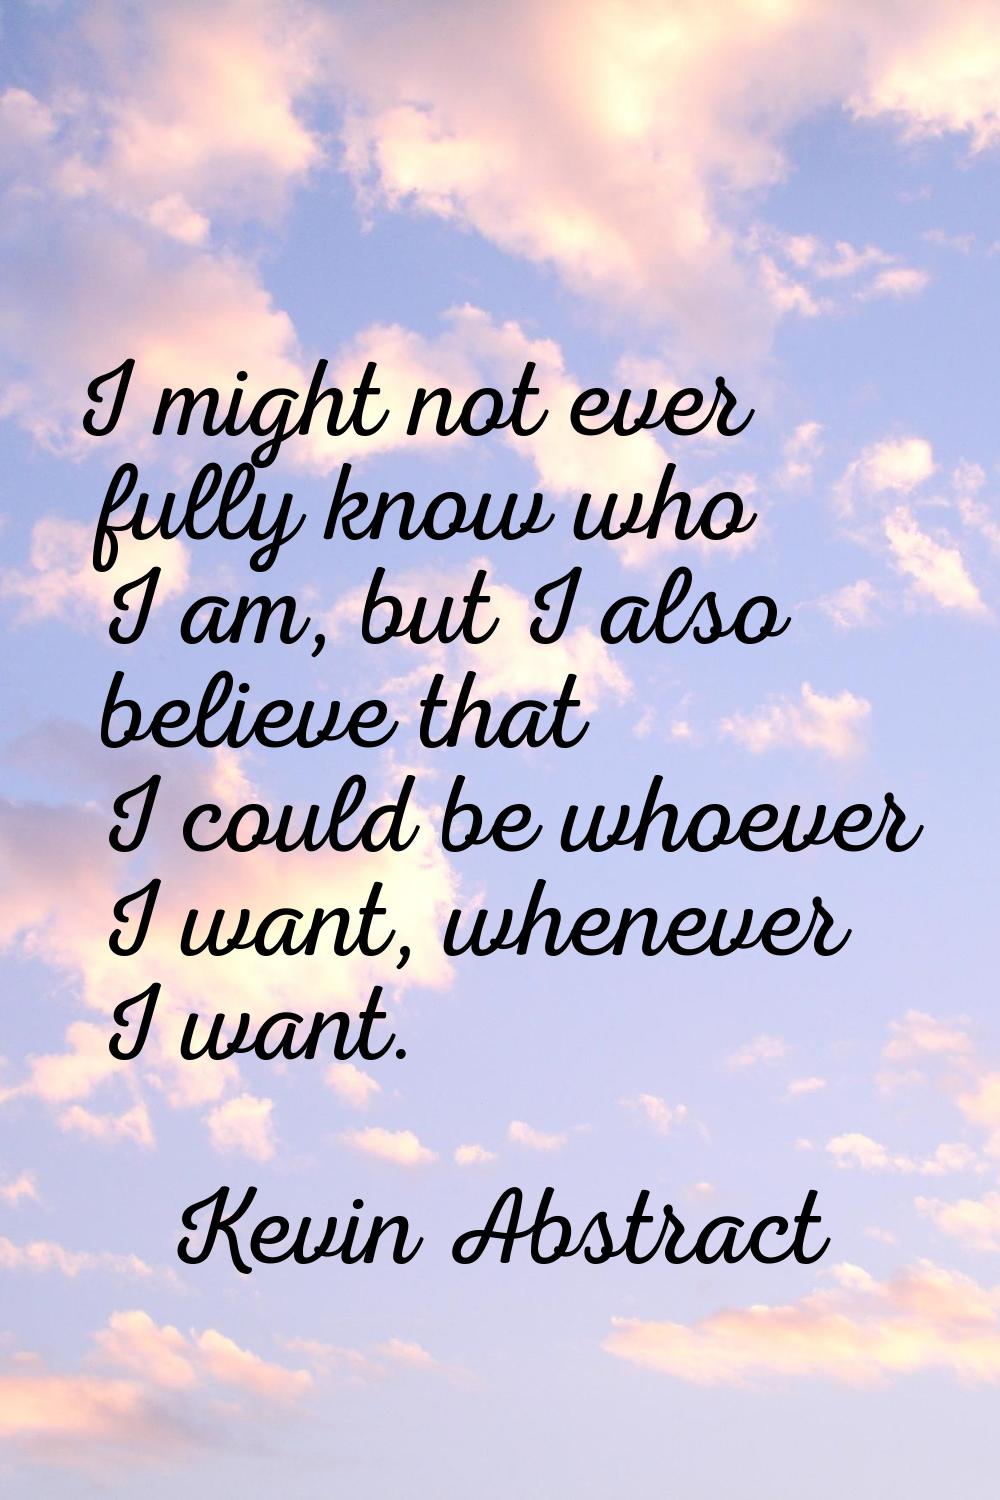 I might not ever fully know who I am, but I also believe that I could be whoever I want, whenever I